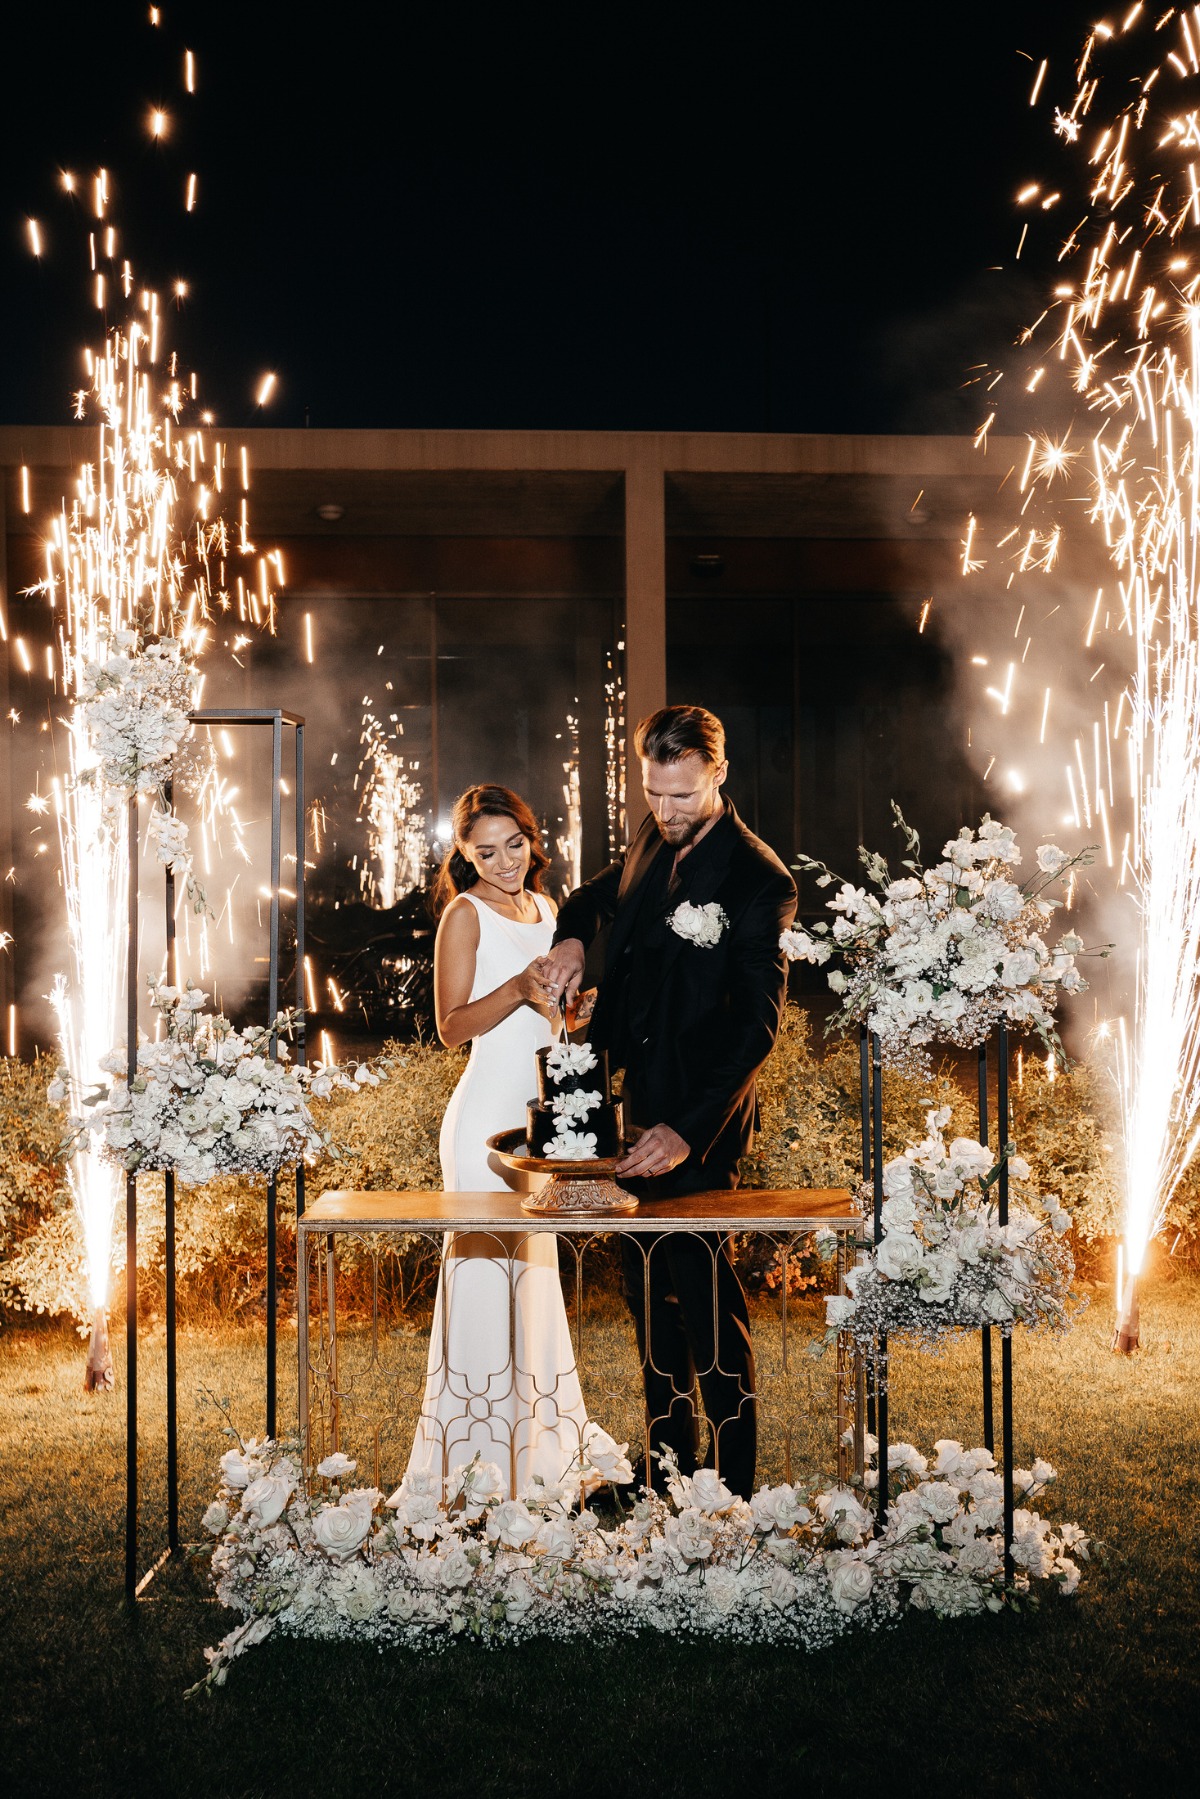 wedding cake cutting with cold sparklers